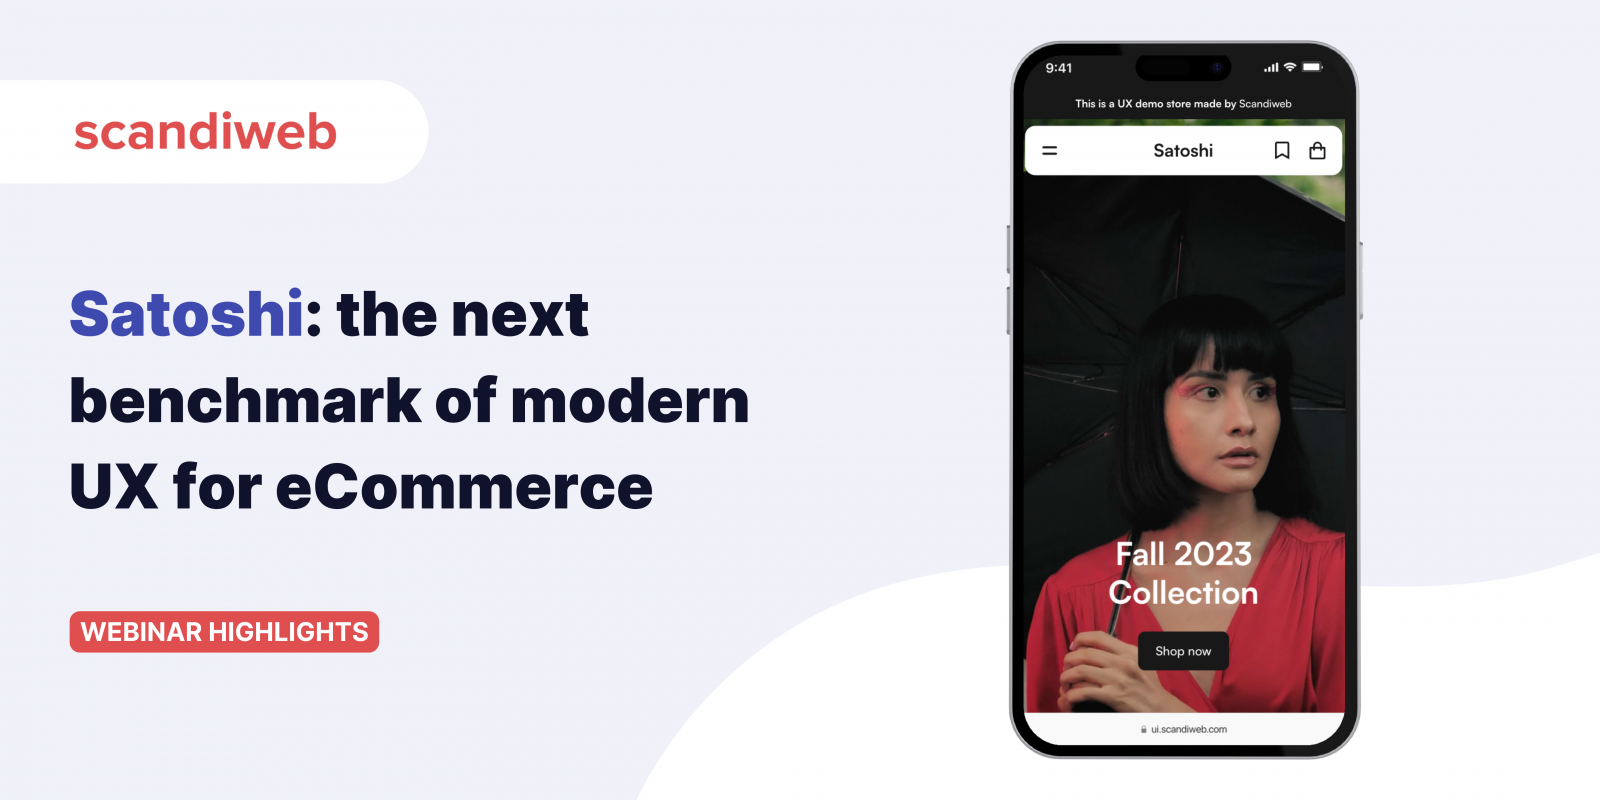 Satoshi: the new benchmark of modern UX for eCommerce